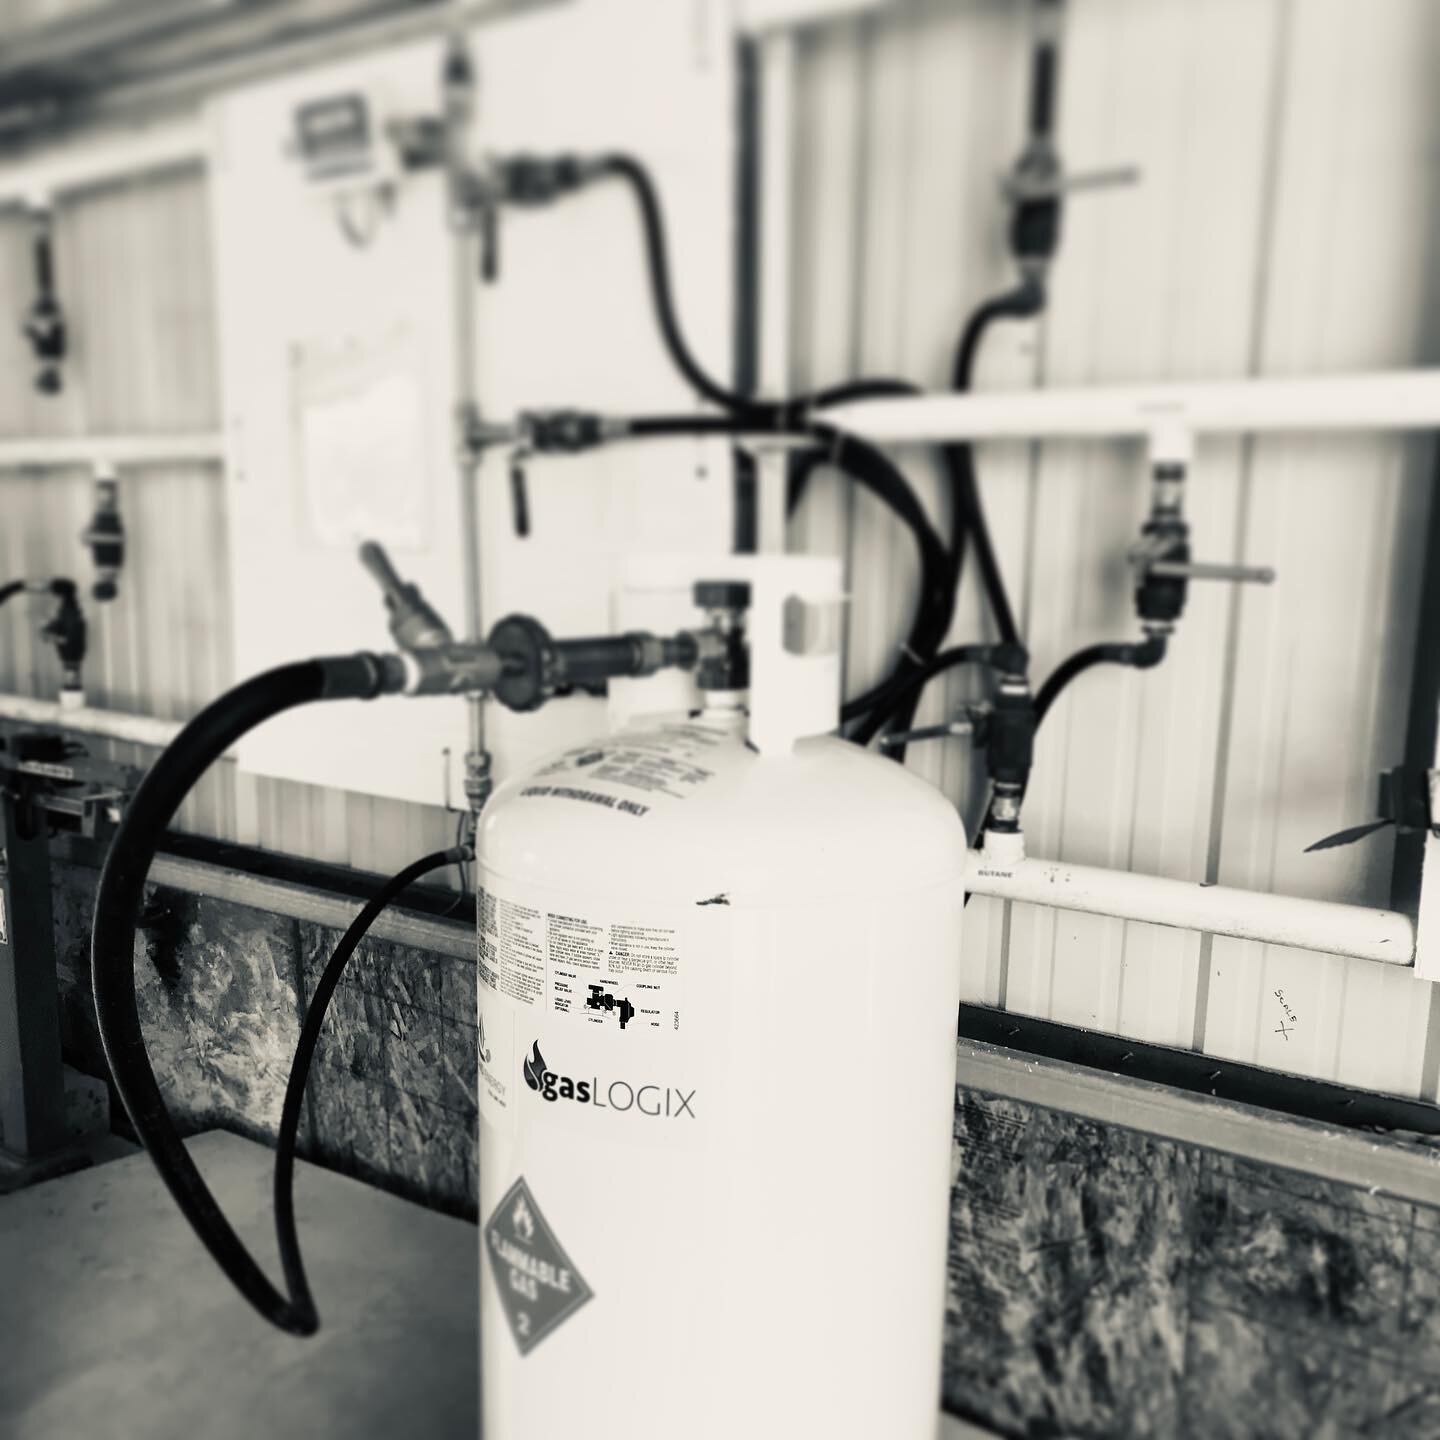 Gas crafted for extraction and the customer service you deserve. Let&rsquo;s put together a plan for @gas_logix to power your lab.
.
.
.
.
.
#710 #bho #i502 #propane #butane #isobutane #dablife #hydrocarbons #solvents #tankhill